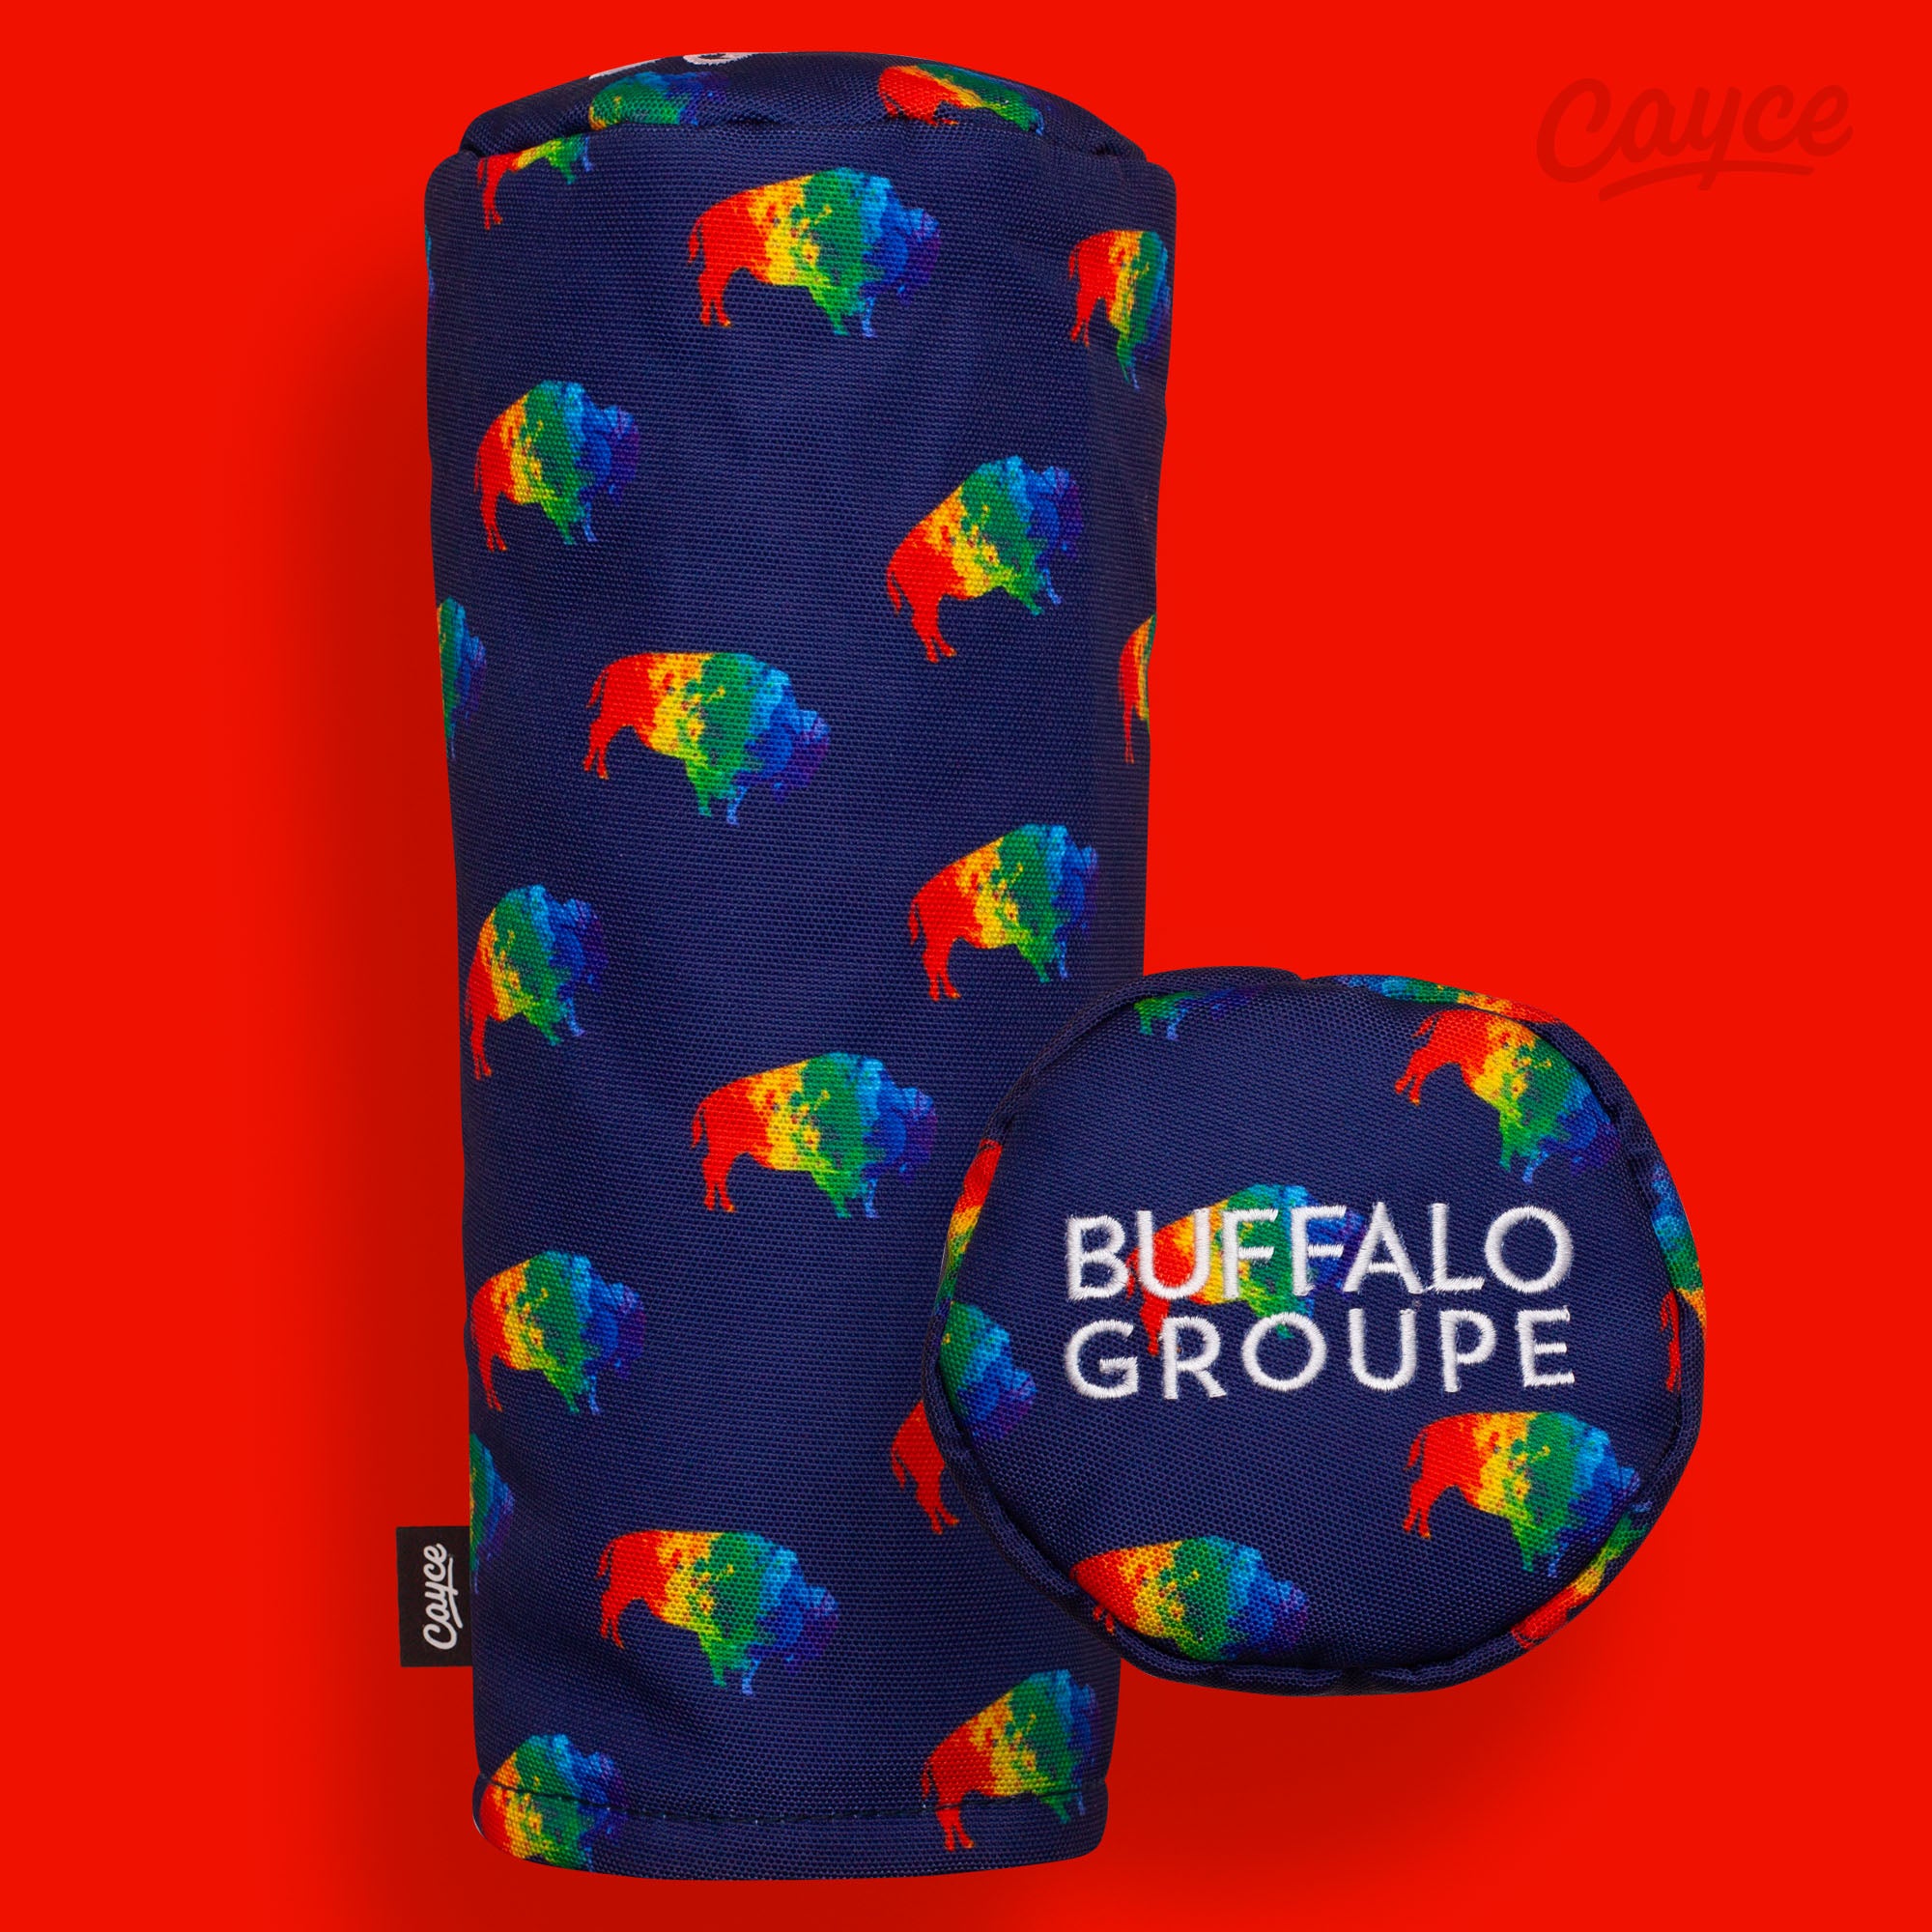 Custom golf head covers for the Buffalo Groupe. Navy Fairway Wood head covers with vibrant dancing buffalo design printed on our DURA+ outer shell and the "Buffalo Groupe" logo embroidered on the top cap. 